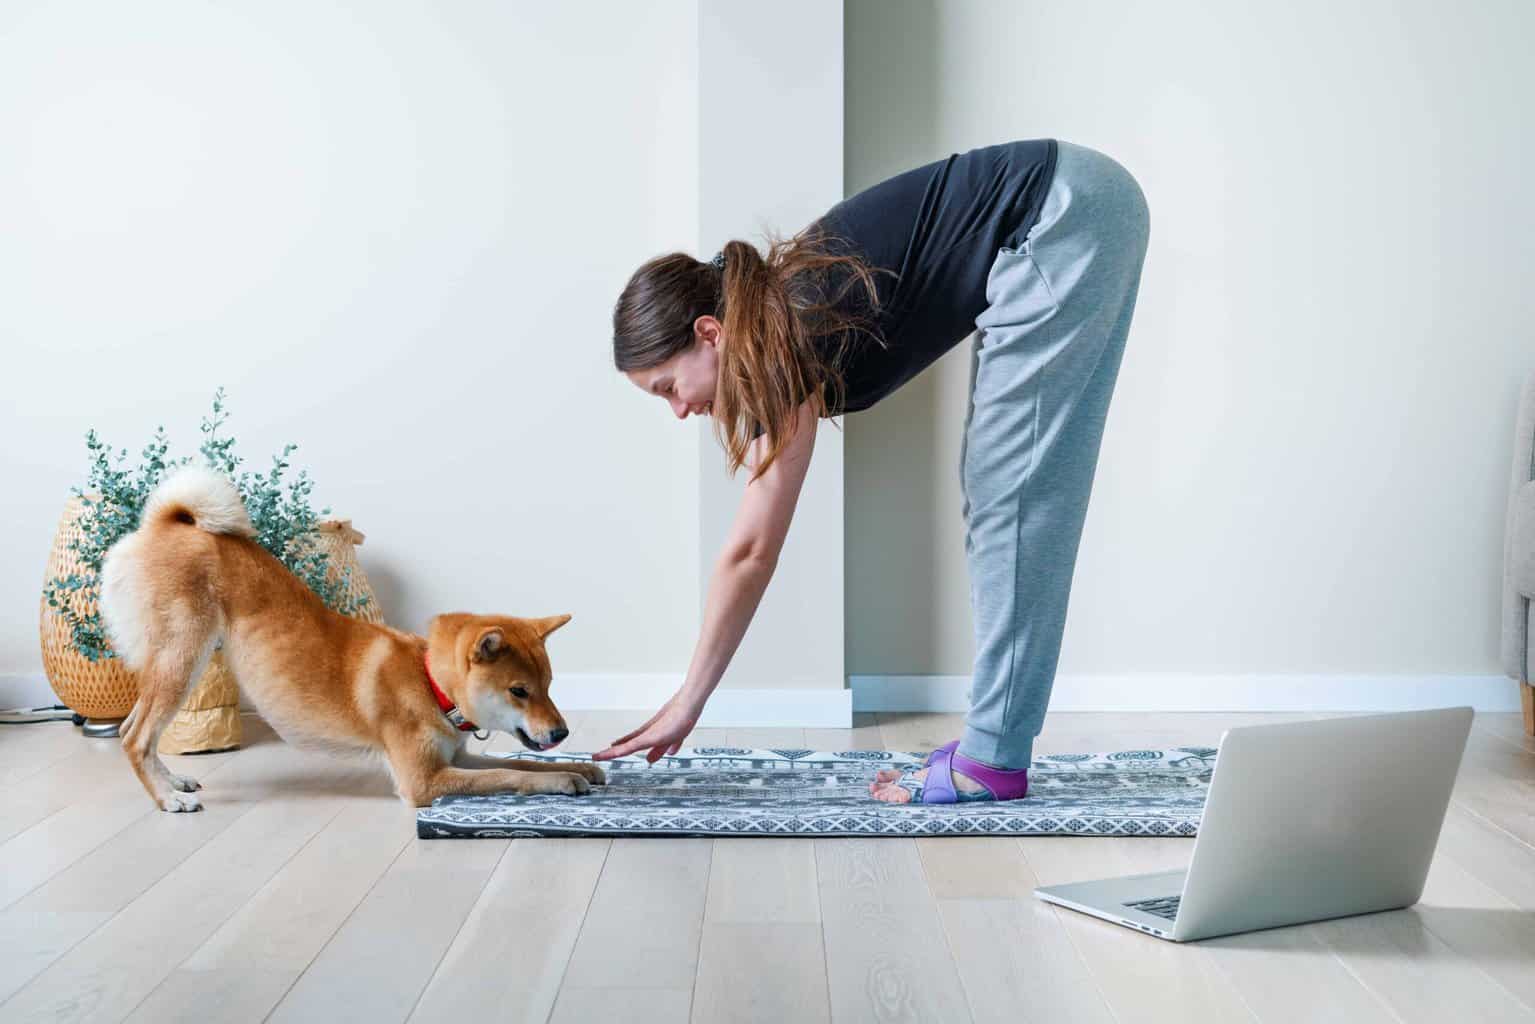 Online dog training courses offer flexible, one-to-one sessions